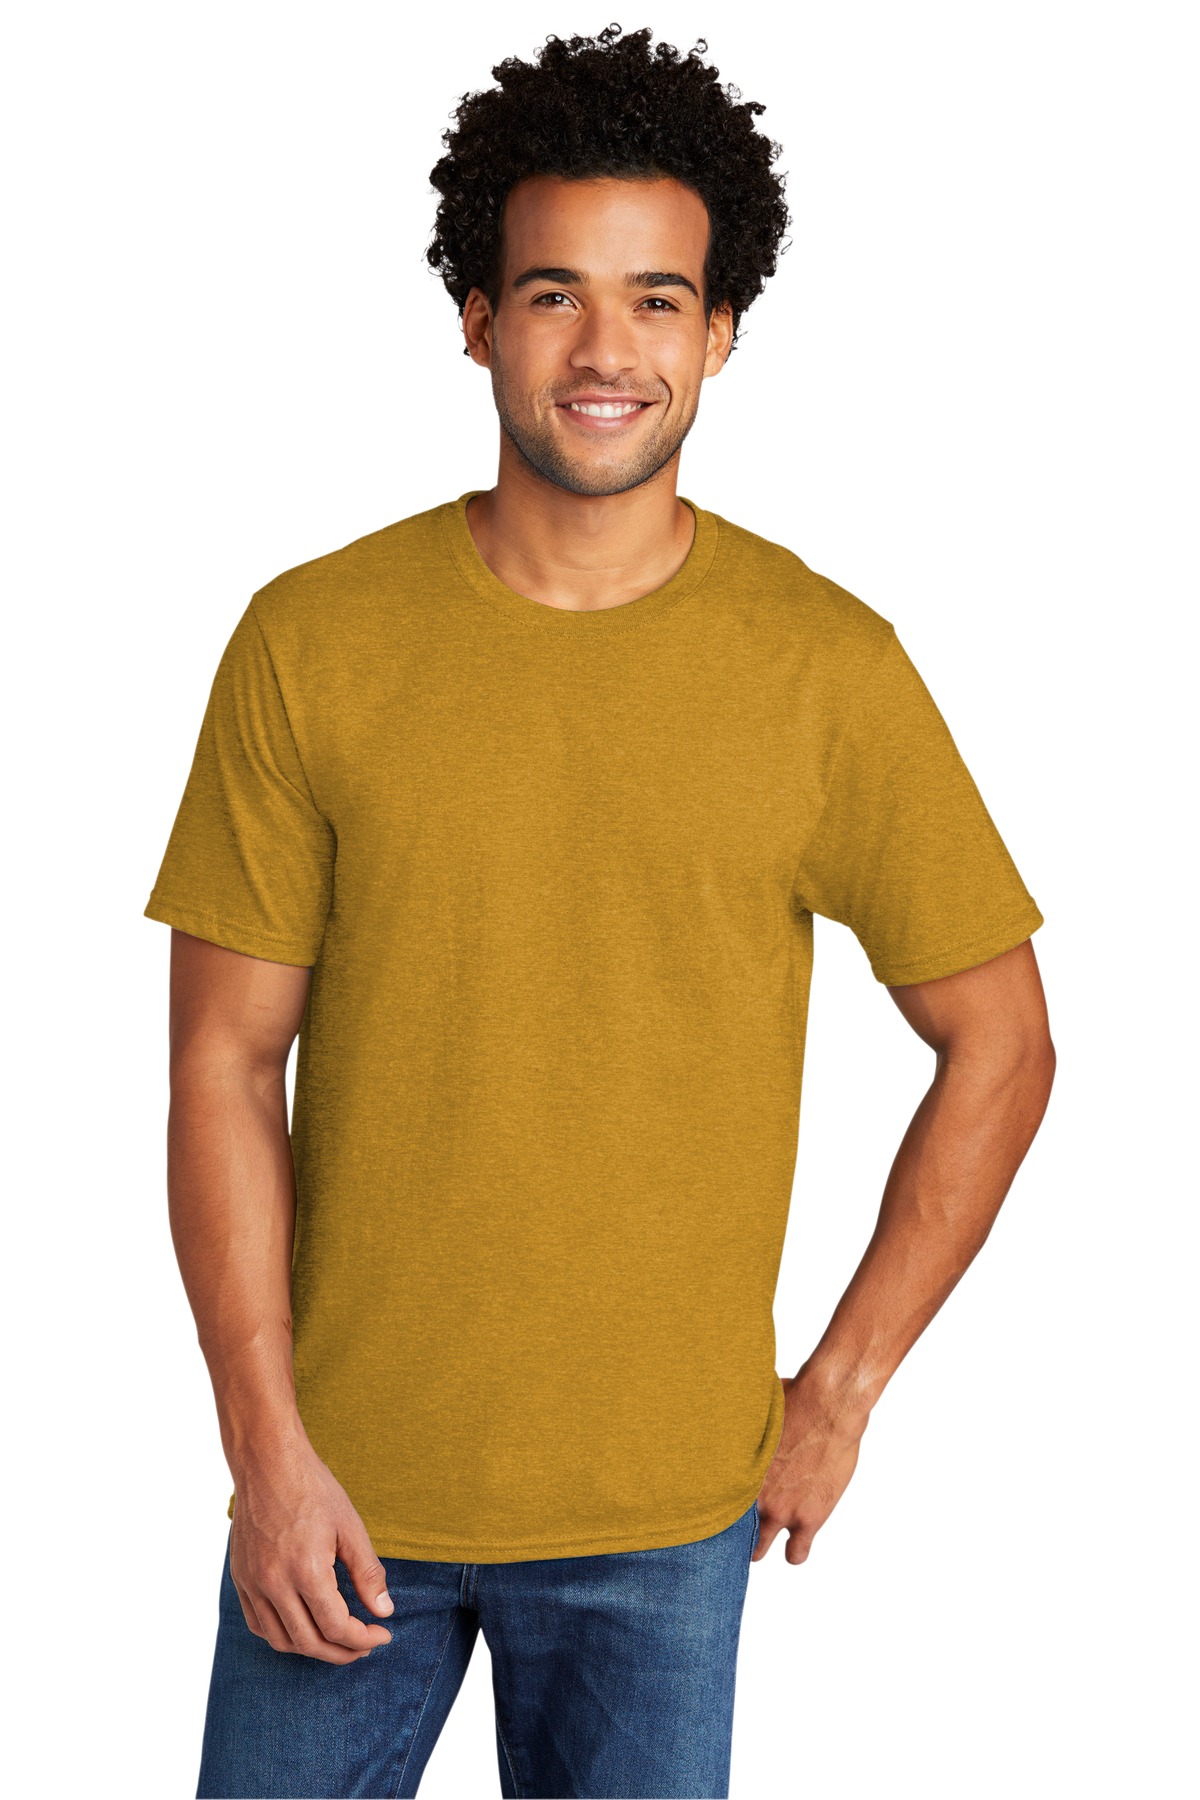 click to view Ochre Yellow Heather